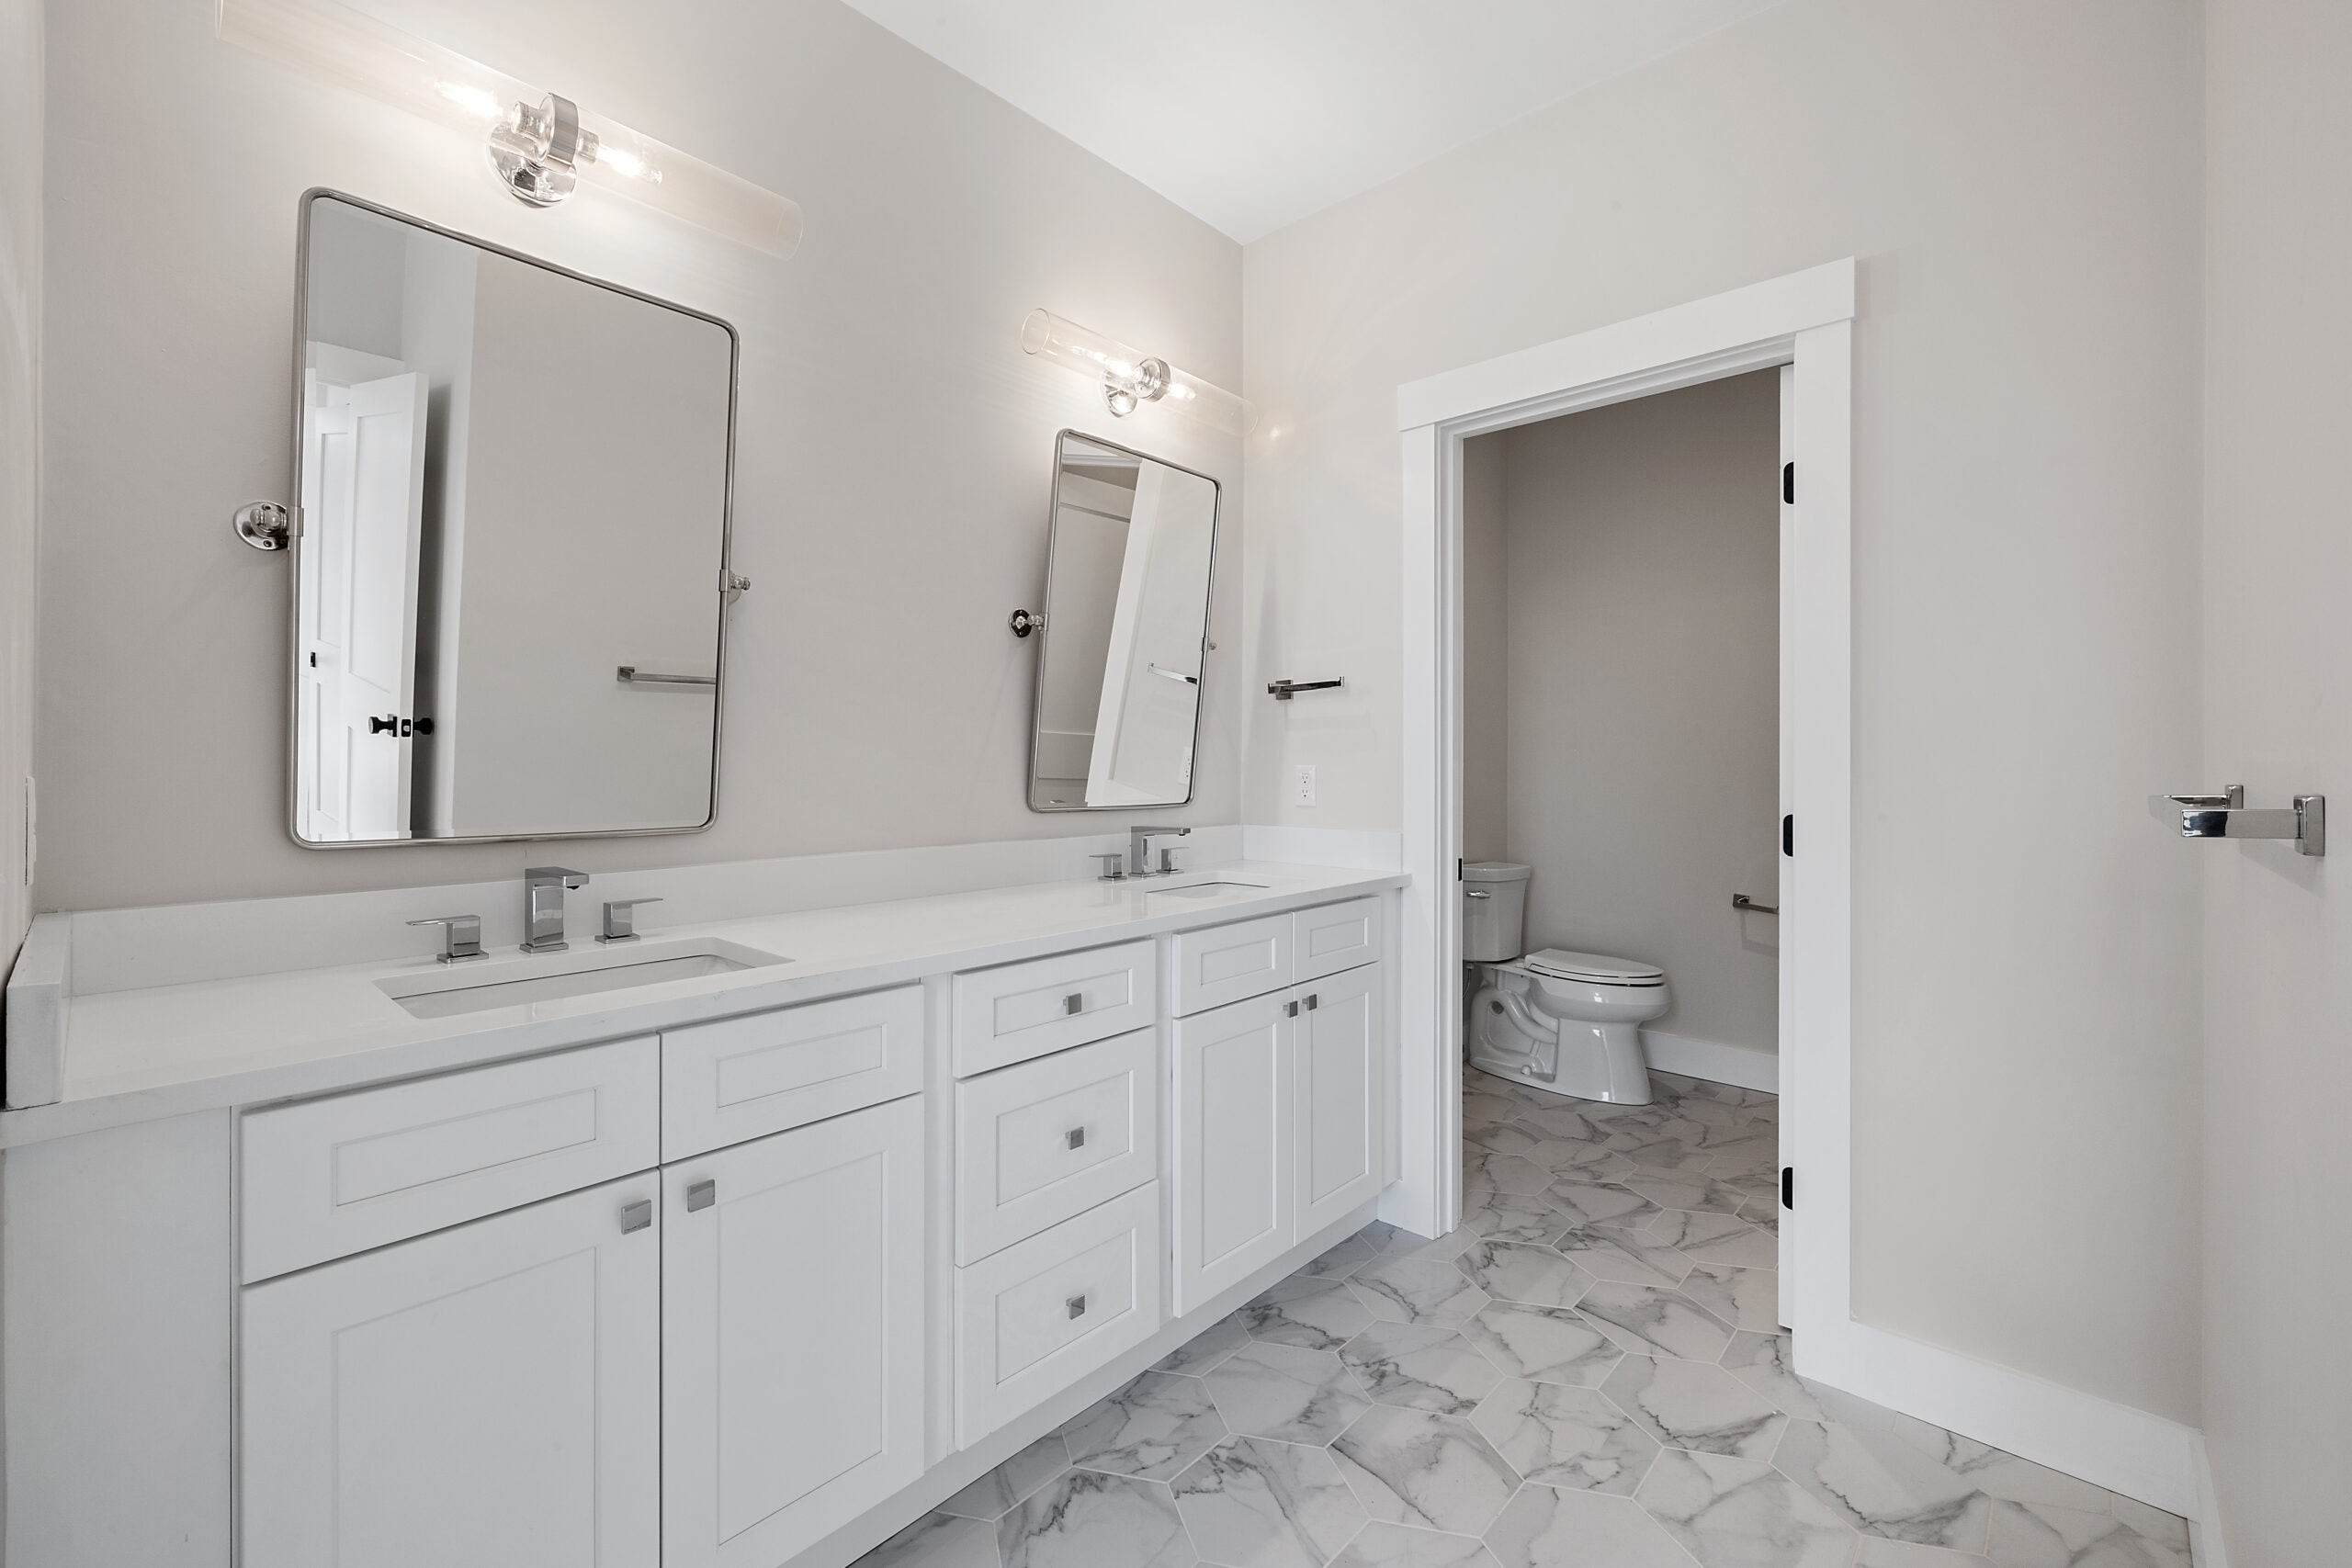 A white double vanity is topped with white quartz. The flooring is a gray and white porcelain tile. The bathroom fixtures are a gray metal. The two square mirrors over the sink tilt toward the user. The water closet is visible in the background. The walls are a soft gray. 